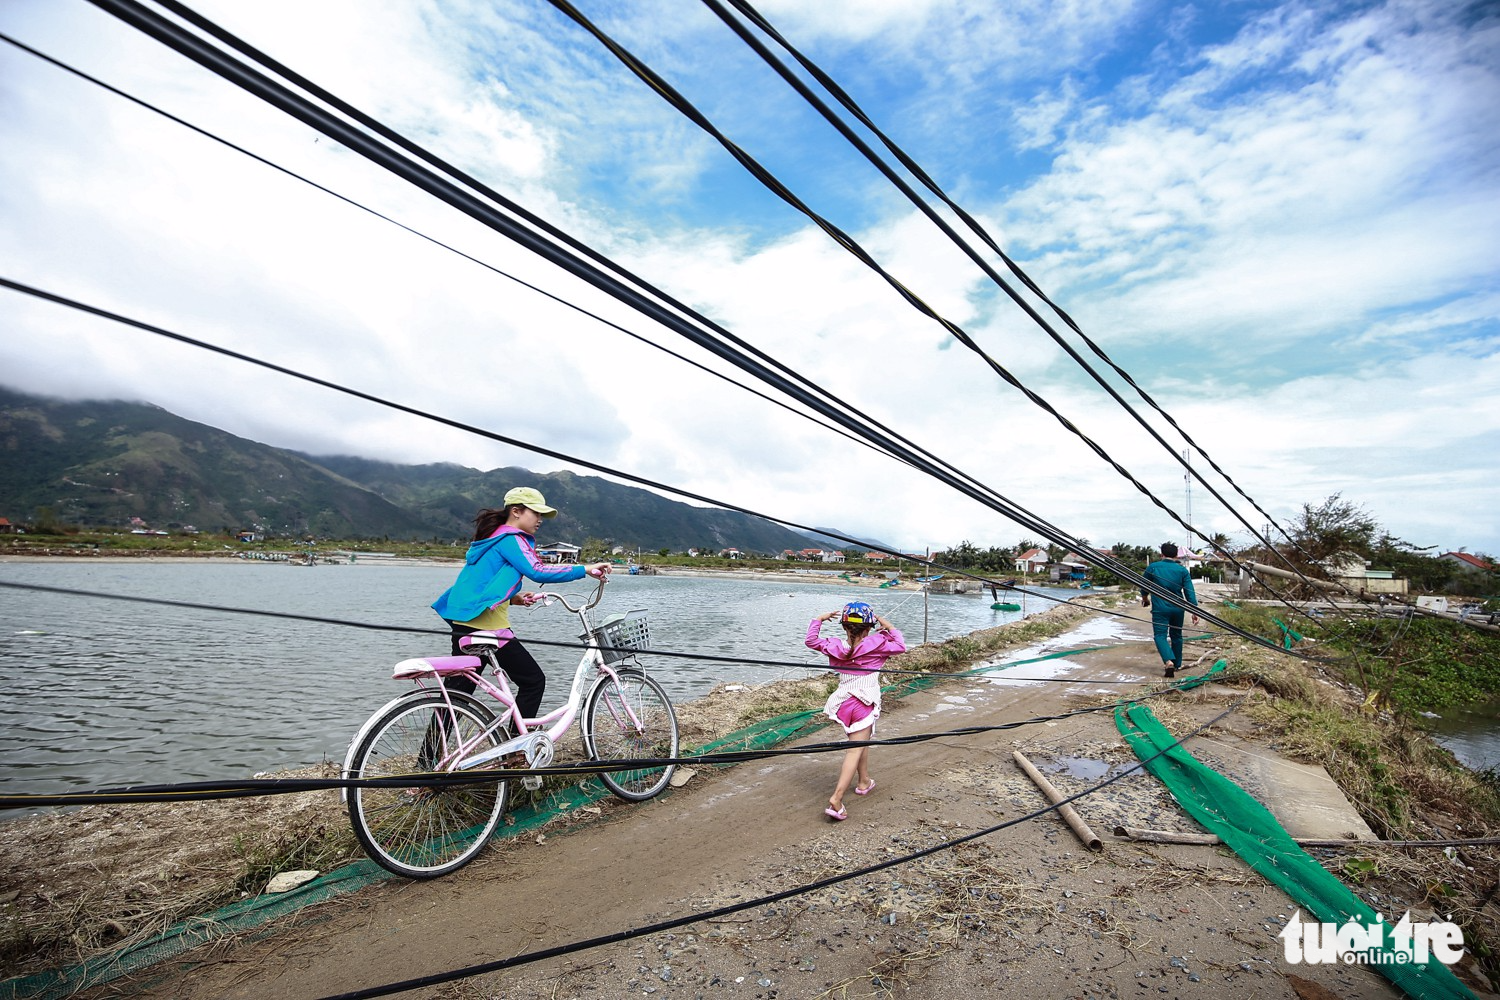 Electric wires lie near the ground in Van Phuoc Commune after the storm.